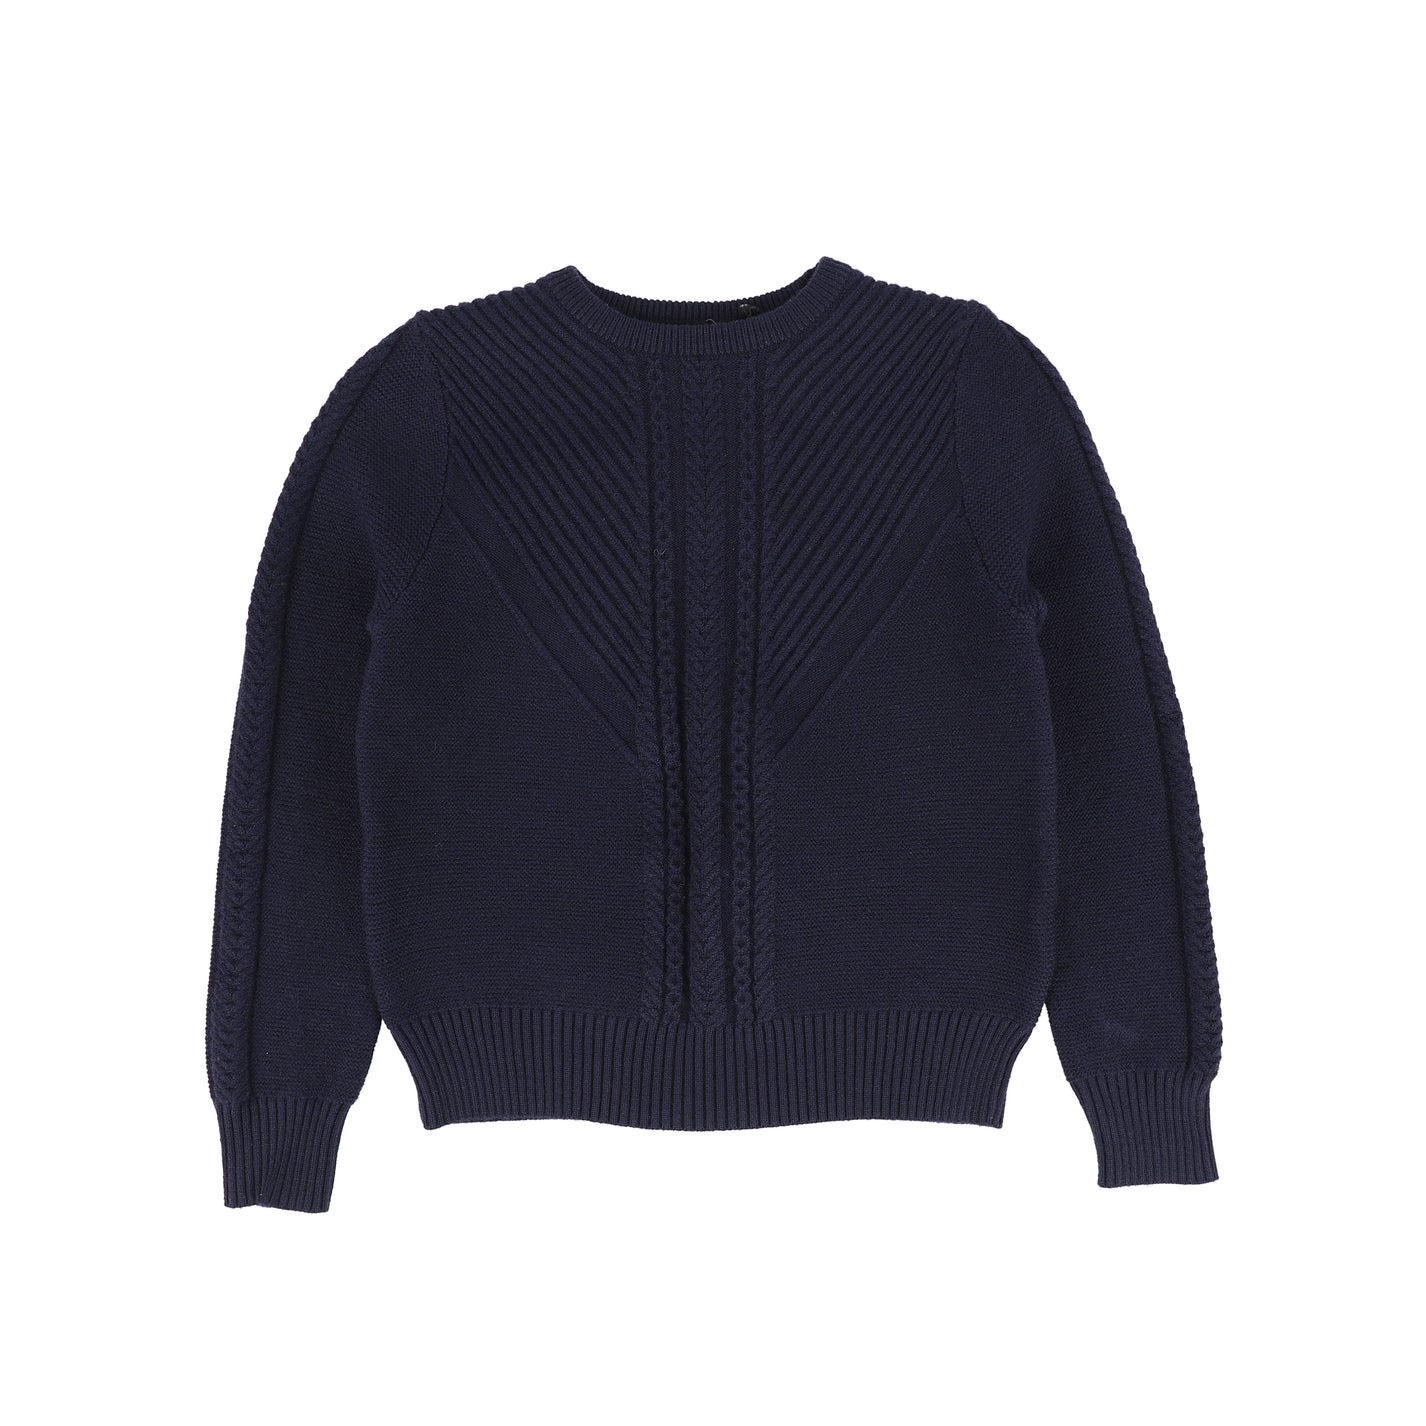 BAMBOO NAVY BRAIDED KNIT SWEATER [Final Sale] – Luibelle